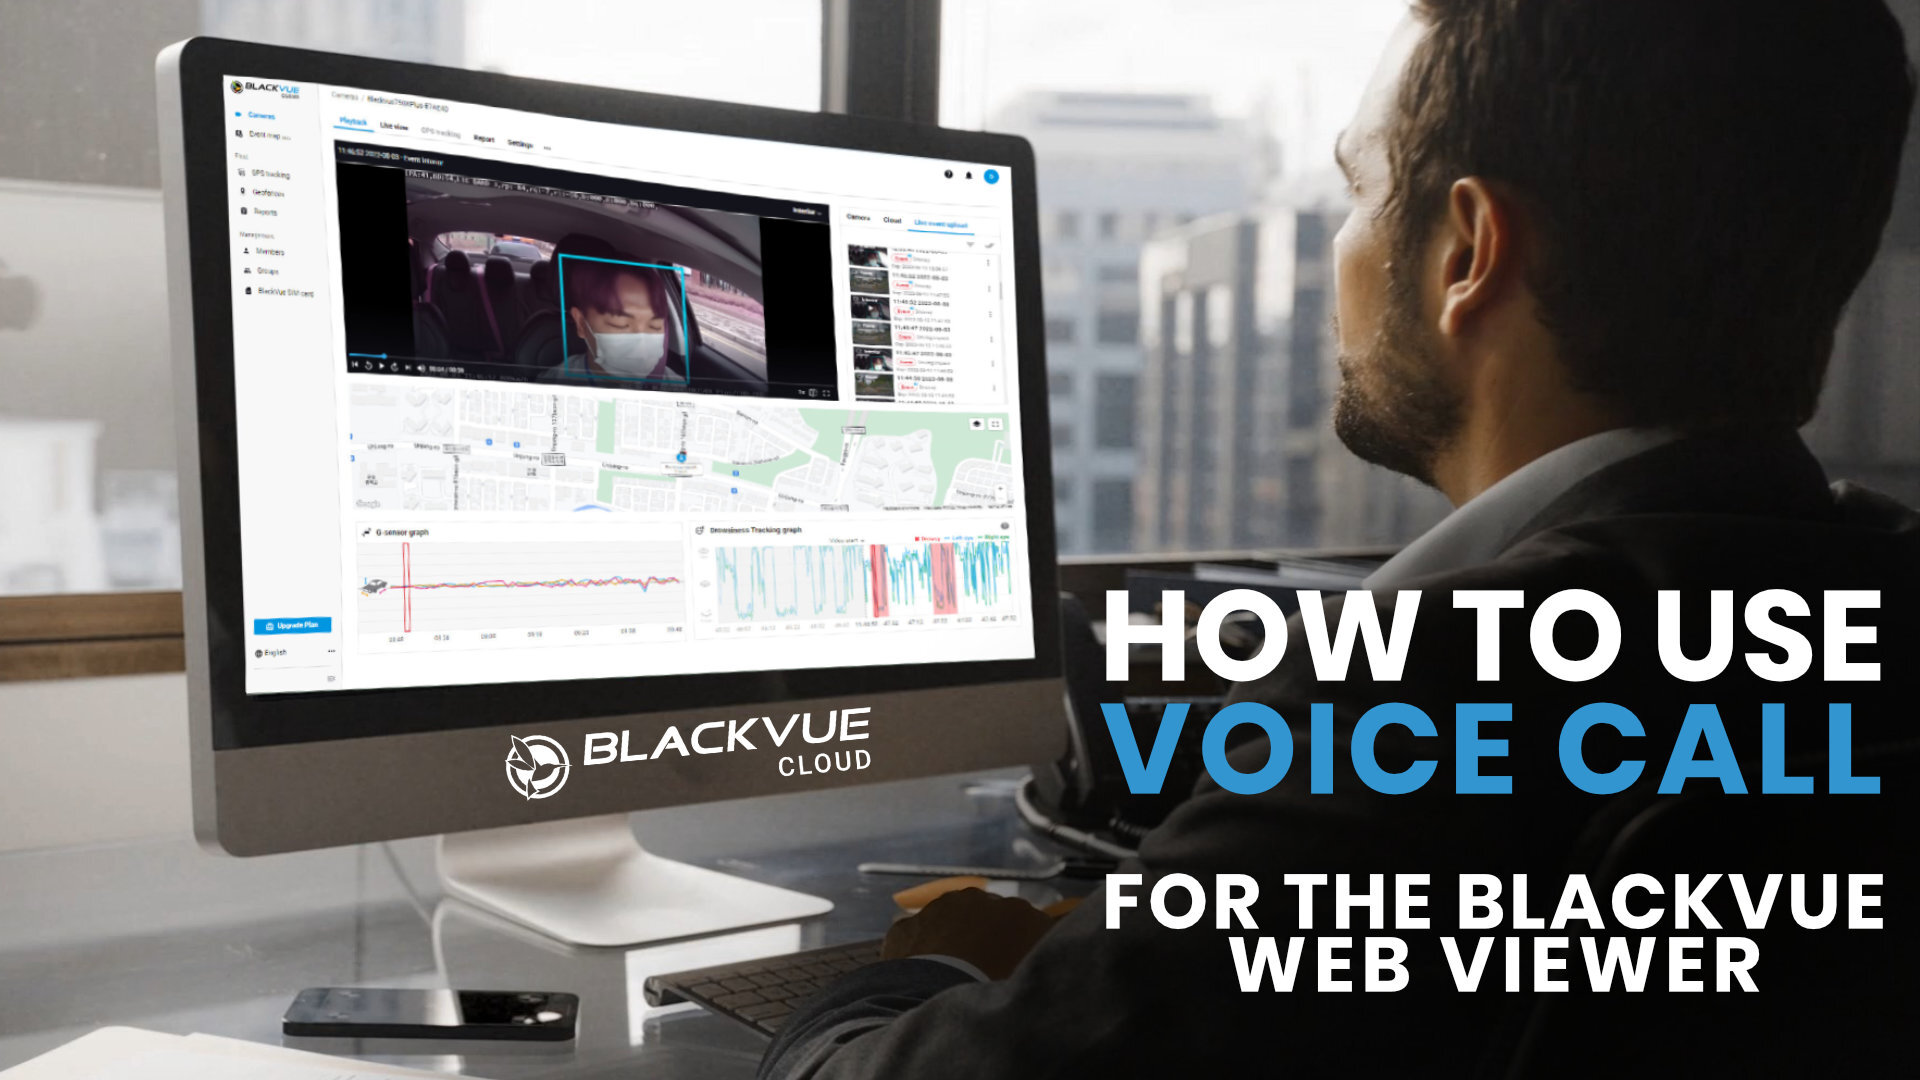 [BlackVue Cloud] Voice Call Tutorial Videos for BlackVue App and Web Viewer